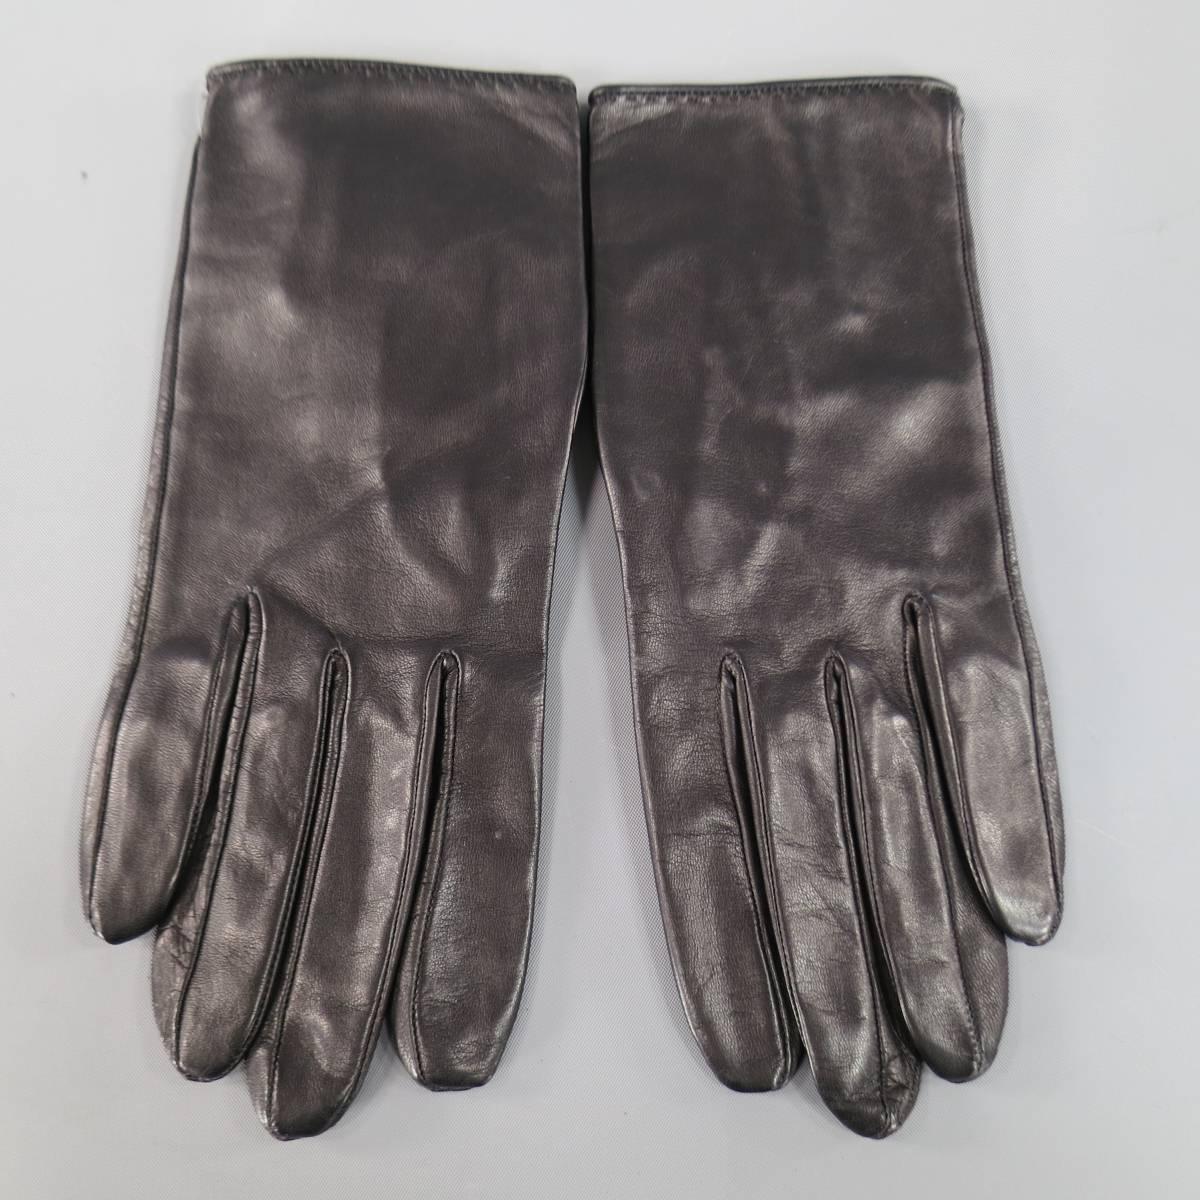 Vintage HERMES gloves in a soft black lambskin leather with top stitching detail. Made in France.
 
Excellent Pre-Owned Condition..
Marked: 7 1/2
 
Measurements:
Length: 9 in.
Width: 3.5 in.
